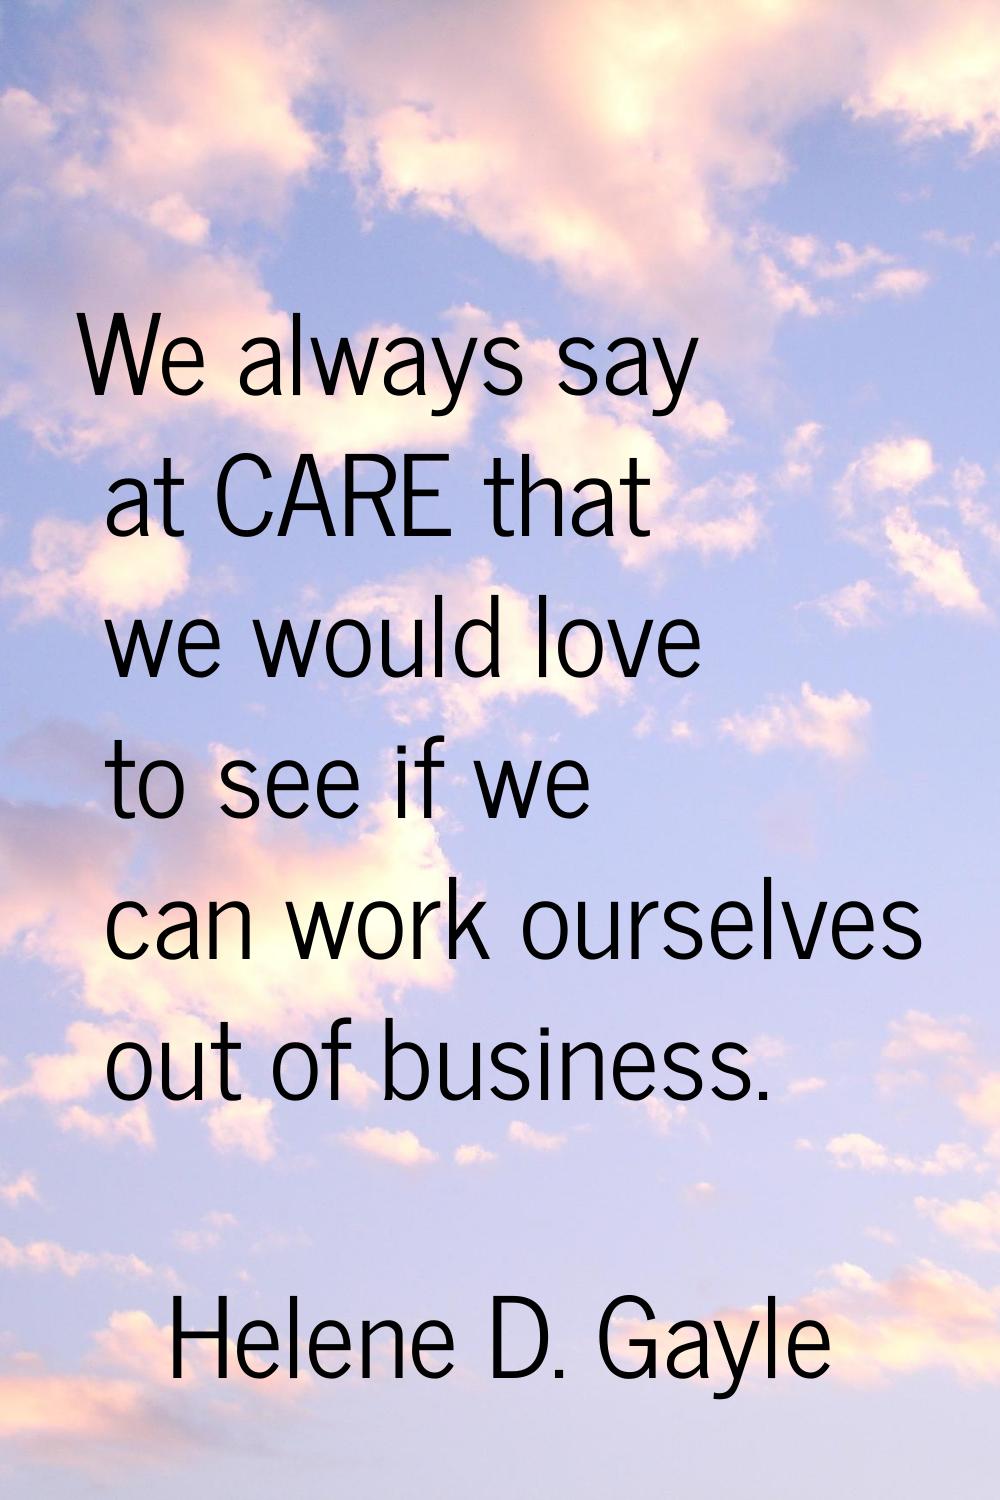 We always say at CARE that we would love to see if we can work ourselves out of business.